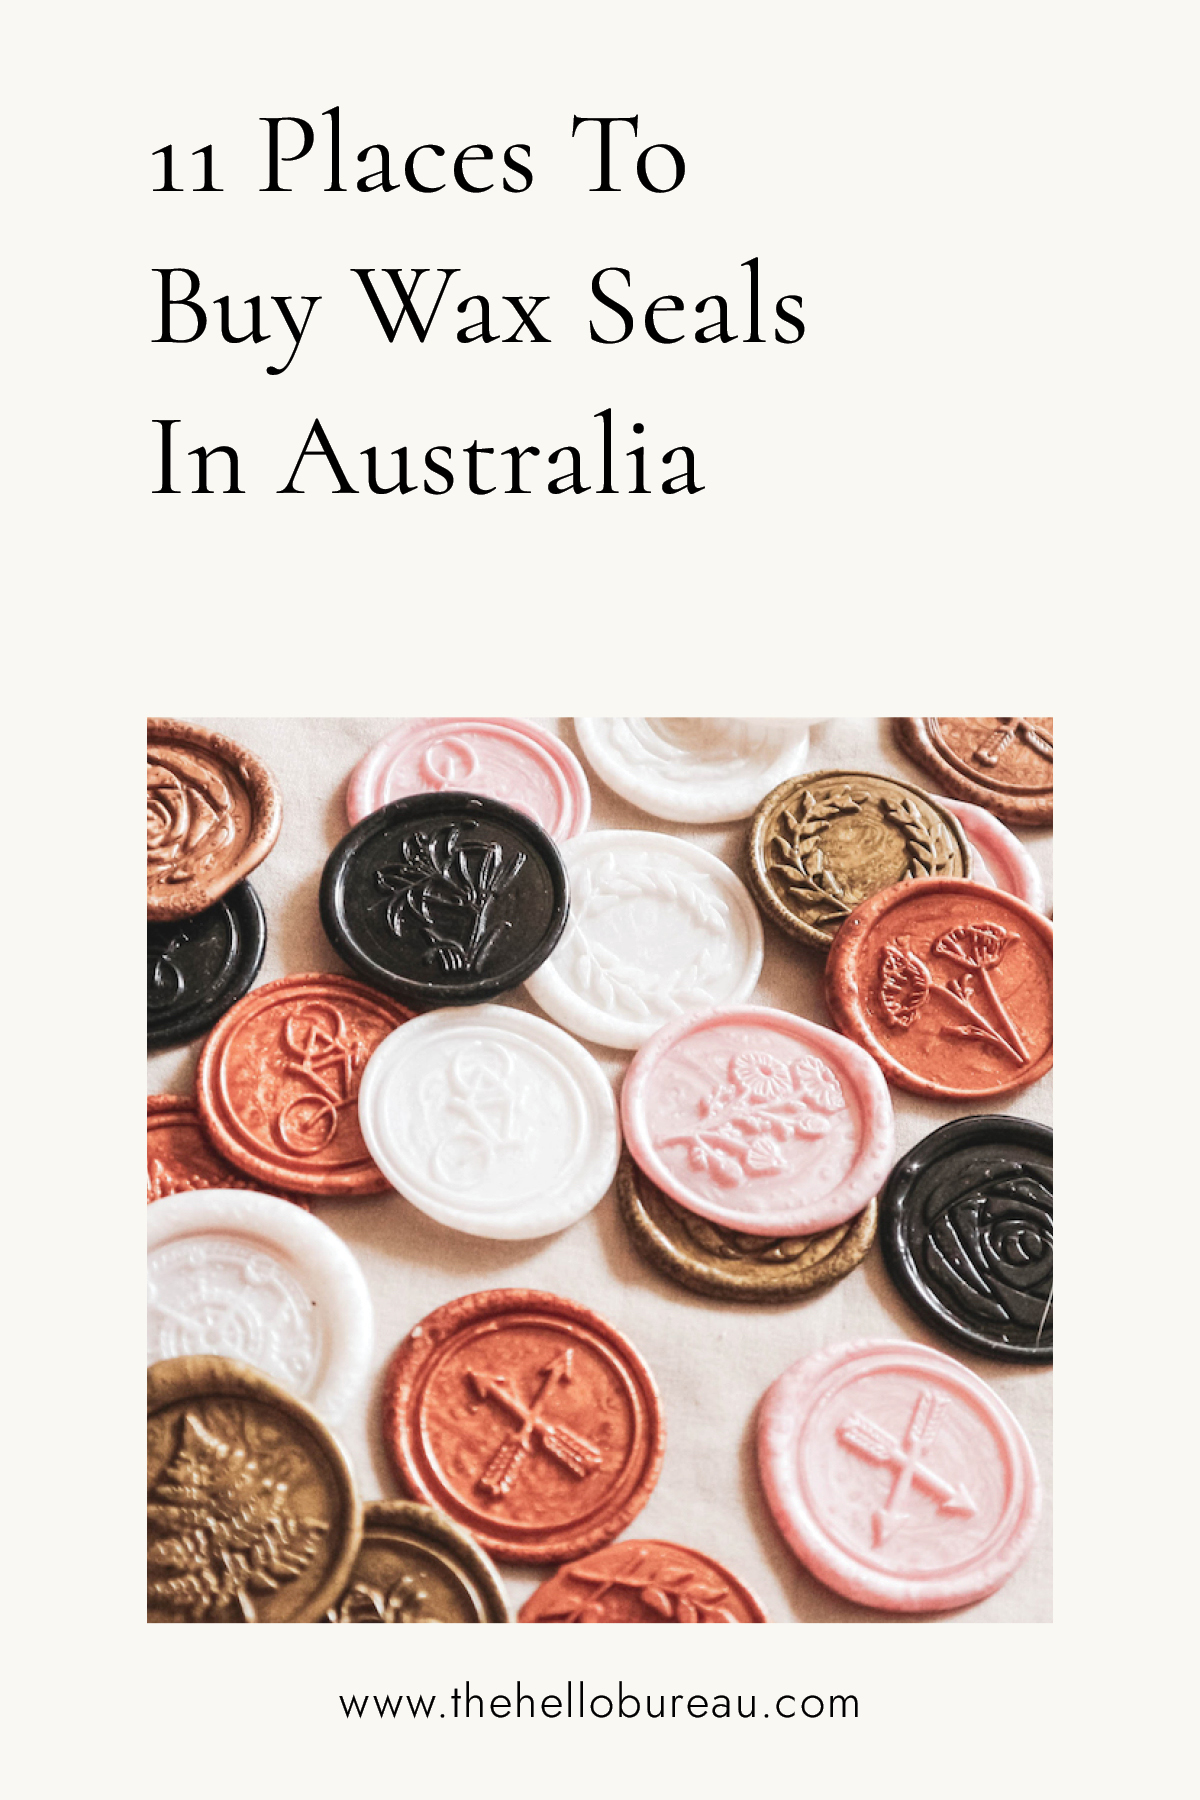 11 Places To Buy Wax Seals In Australia